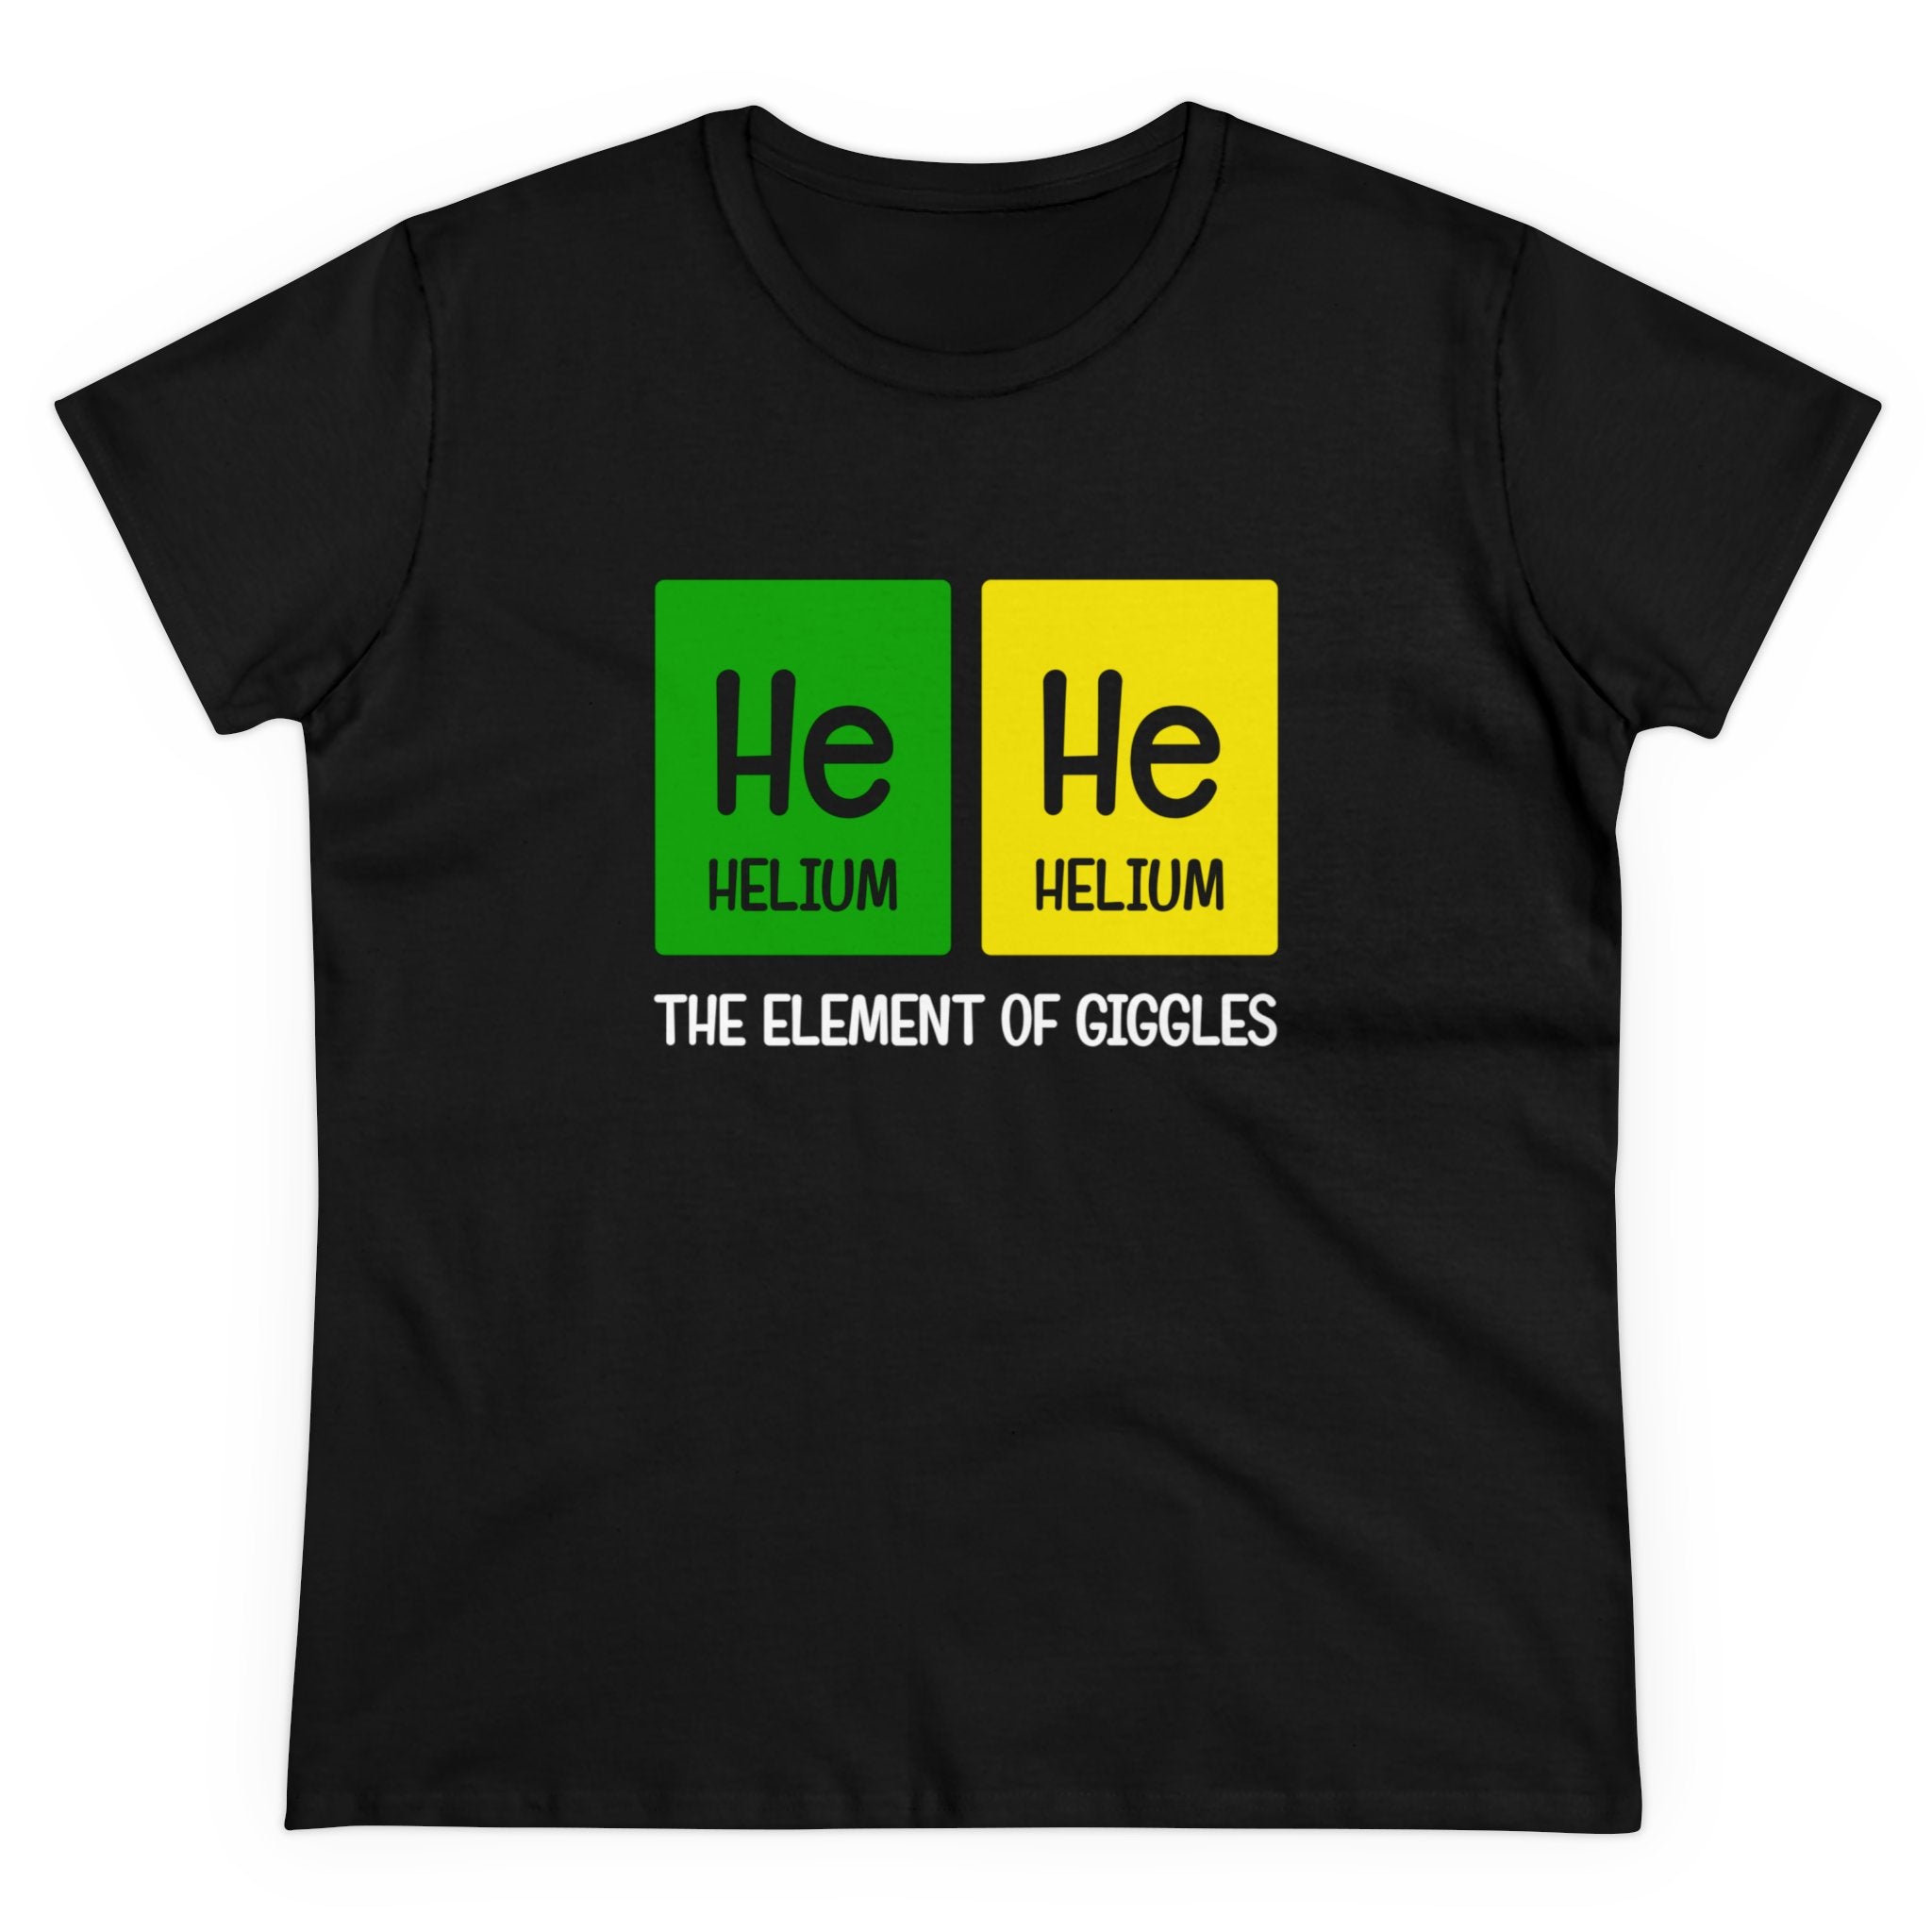 He-He - Women'sTee made from ethically grown cotton, featuring periodic table elements helium (He) in green and yellow boxes with the text "He He Helium, The Element of Giggles" below. Cozy and soft for a comfortable fit.